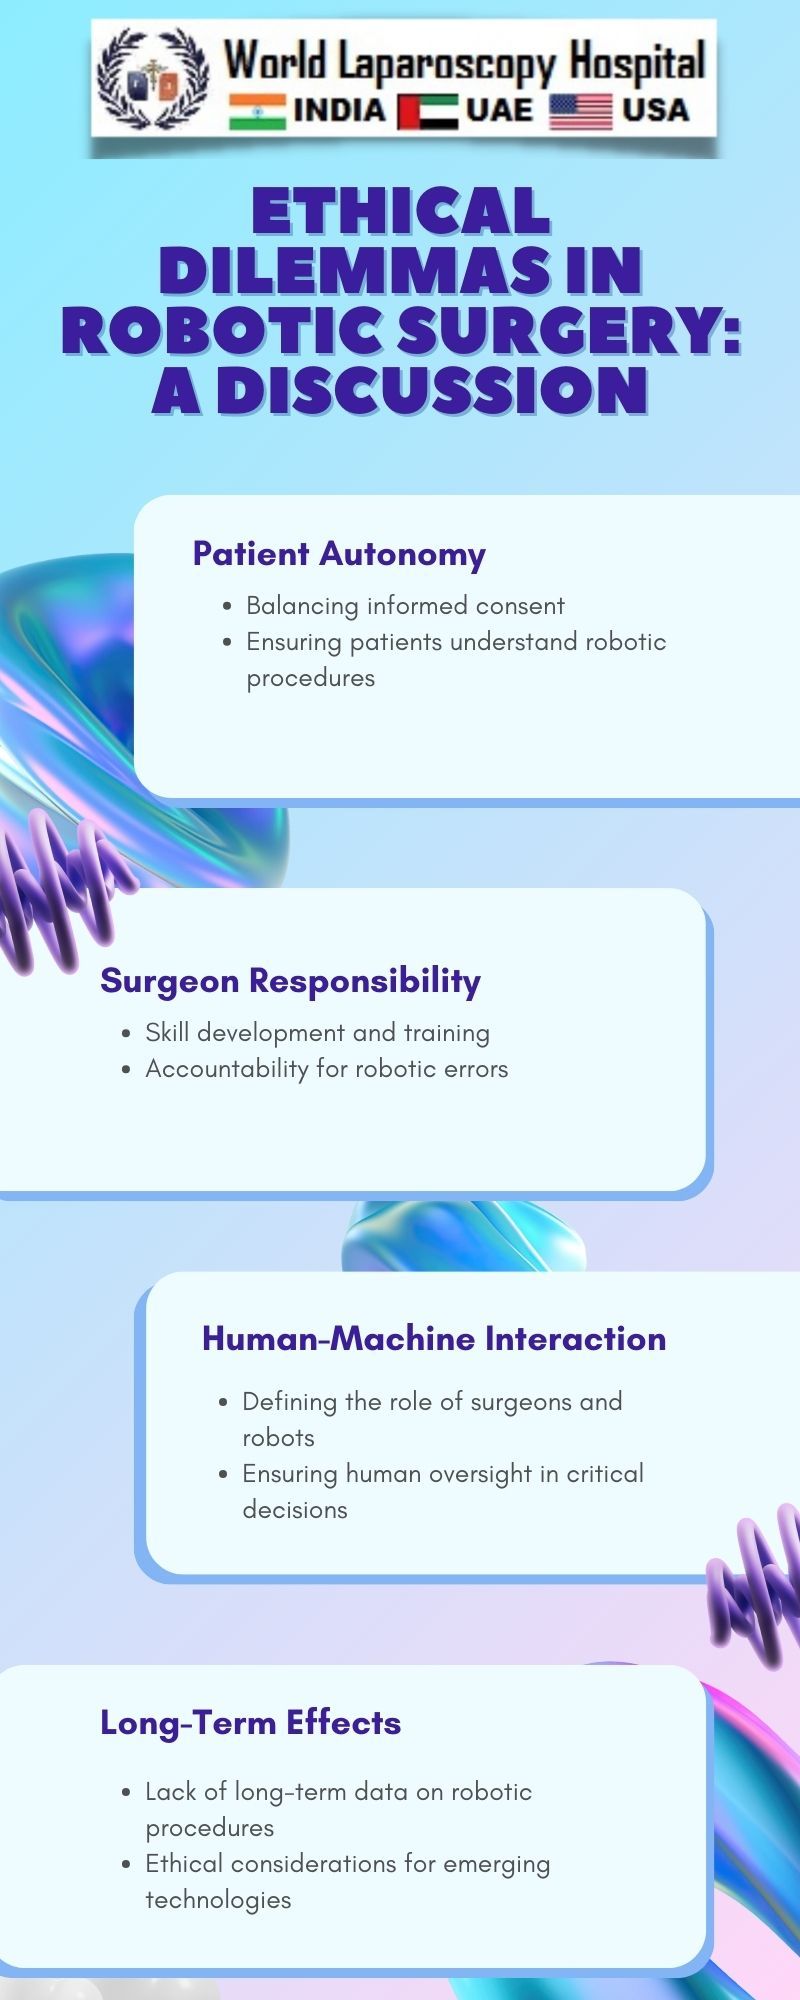 Ethical Dilemmas in Robotic Surgery: A Discussion